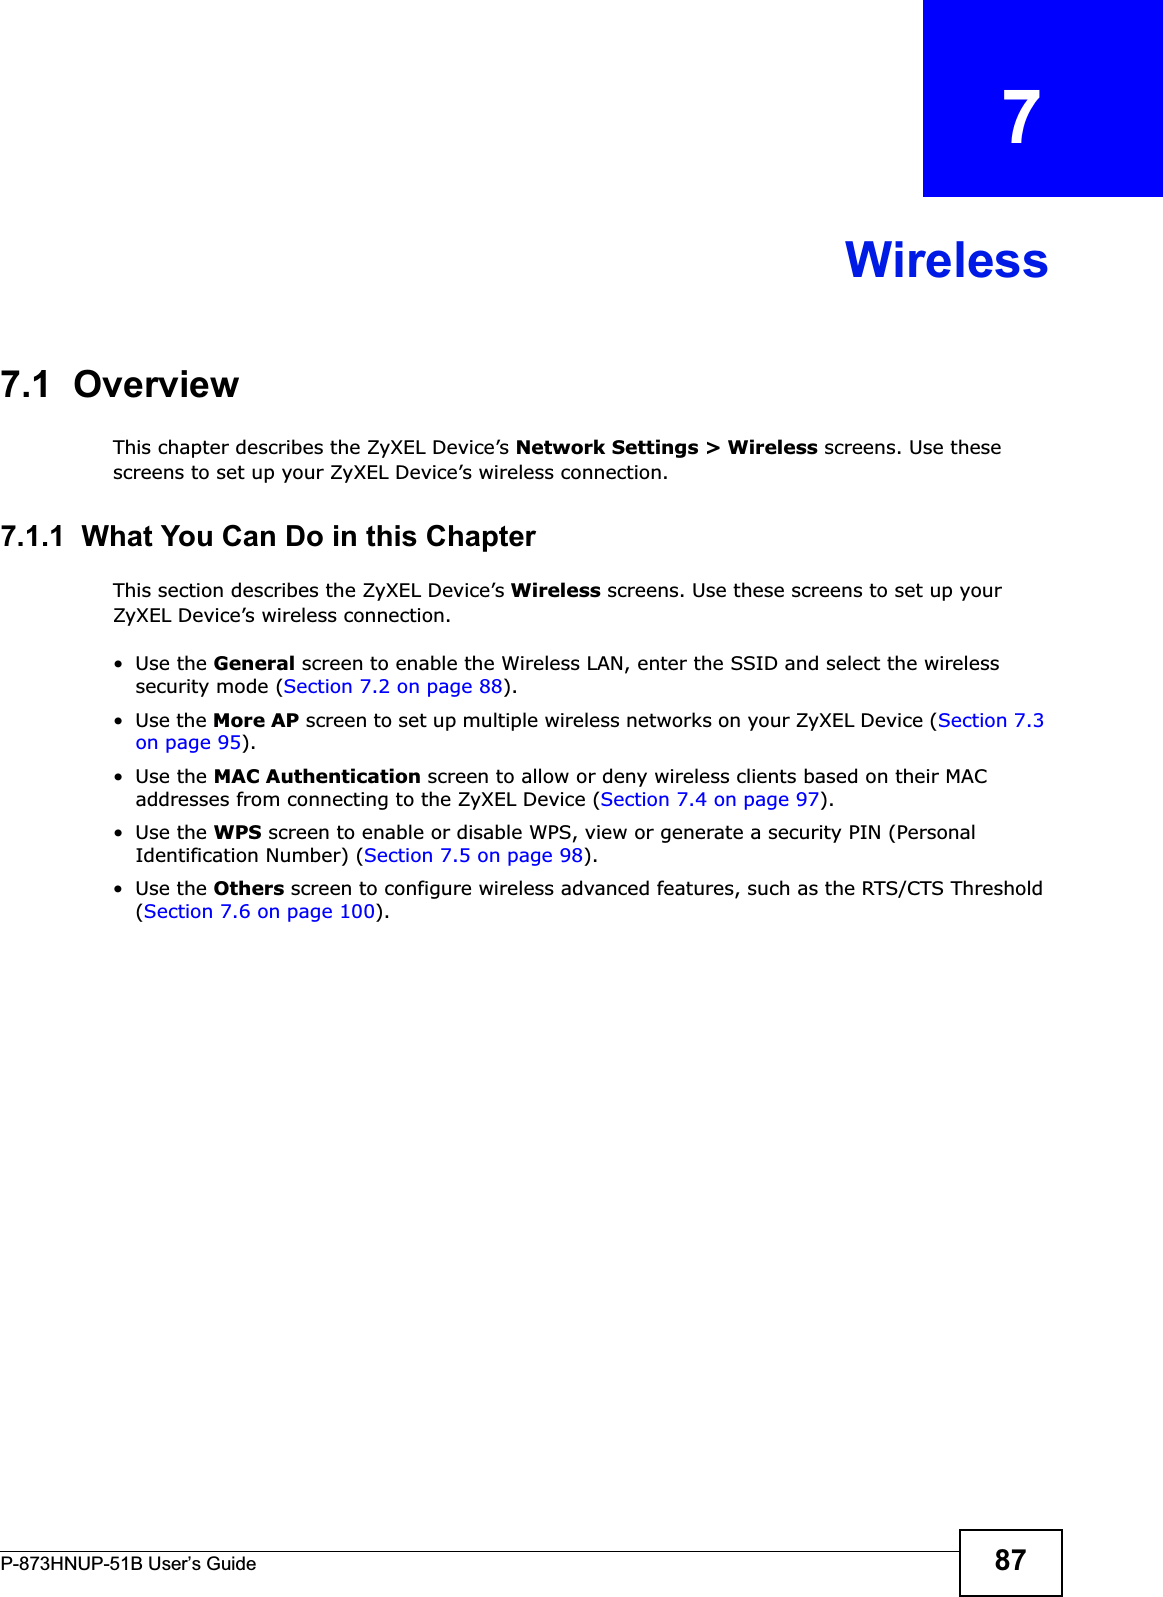 P-873HNUP-51B User’s Guide 87CHAPTER   7Wireless7.1  Overview This chapter describes the ZyXEL Device’s Network Settings &gt; Wireless screens. Use these screens to set up your ZyXEL Device’s wireless connection.7.1.1  What You Can Do in this ChapterThis section describes the ZyXEL Device’s Wireless screens. Use these screens to set up your ZyXEL Device’s wireless connection.•Use the General screen to enable the Wireless LAN, enter the SSID and select the wireless security mode (Section 7.2 on page 88).•Use the More AP screen to set up multiple wireless networks on your ZyXEL Device (Section 7.3 on page 95).•Use the MAC Authentication screen to allow or deny wireless clients based on their MAC addresses from connecting to the ZyXEL Device (Section 7.4 on page 97).•Use the WPS screen to enable or disable WPS, view or generate a security PIN (Personal Identification Number) (Section 7.5 on page 98).•Use the Others screen to configure wireless advanced features, such as the RTS/CTS Threshold (Section 7.6 on page 100).